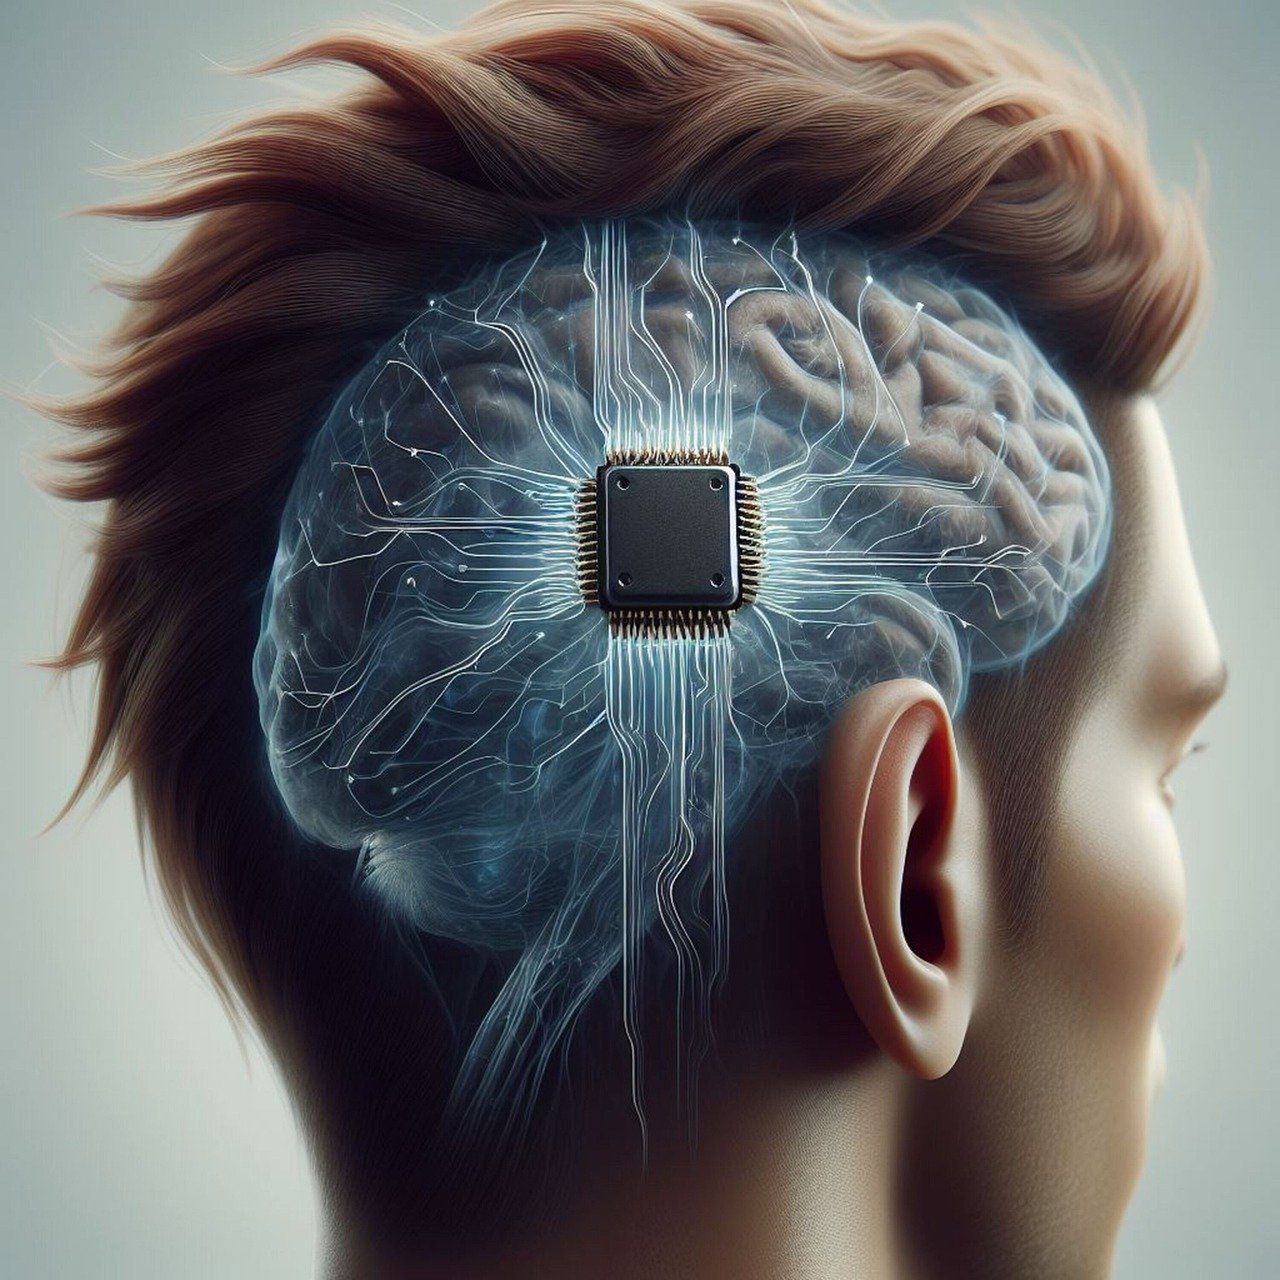 Implant implanted in the brain